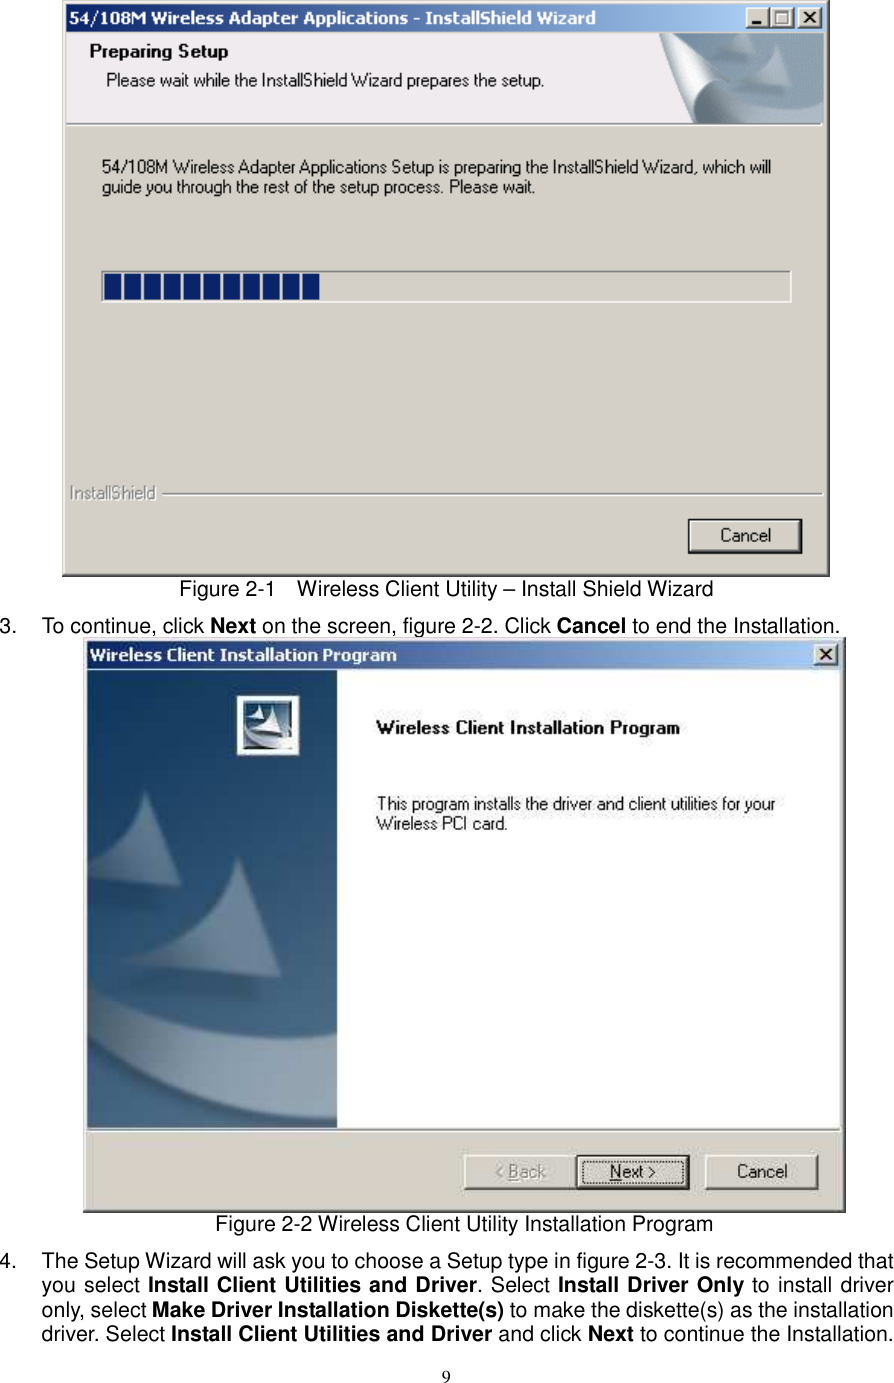  9 Figure 2-1    Wireless Client Utility – Install Shield Wizard 3.  To continue, click Next on the screen, figure 2-2. Click Cancel to end the Installation.    Figure 2-2 Wireless Client Utility Installation Program 4.  The Setup Wizard will ask you to choose a Setup type in figure 2-3. It is recommended that you select Install Client Utilities and Driver. Select Install Driver Only to install driver only, select Make Driver Installation Diskette(s) to make the diskette(s) as the installation driver. Select Install Client Utilities and Driver and click Next to continue the Installation. 